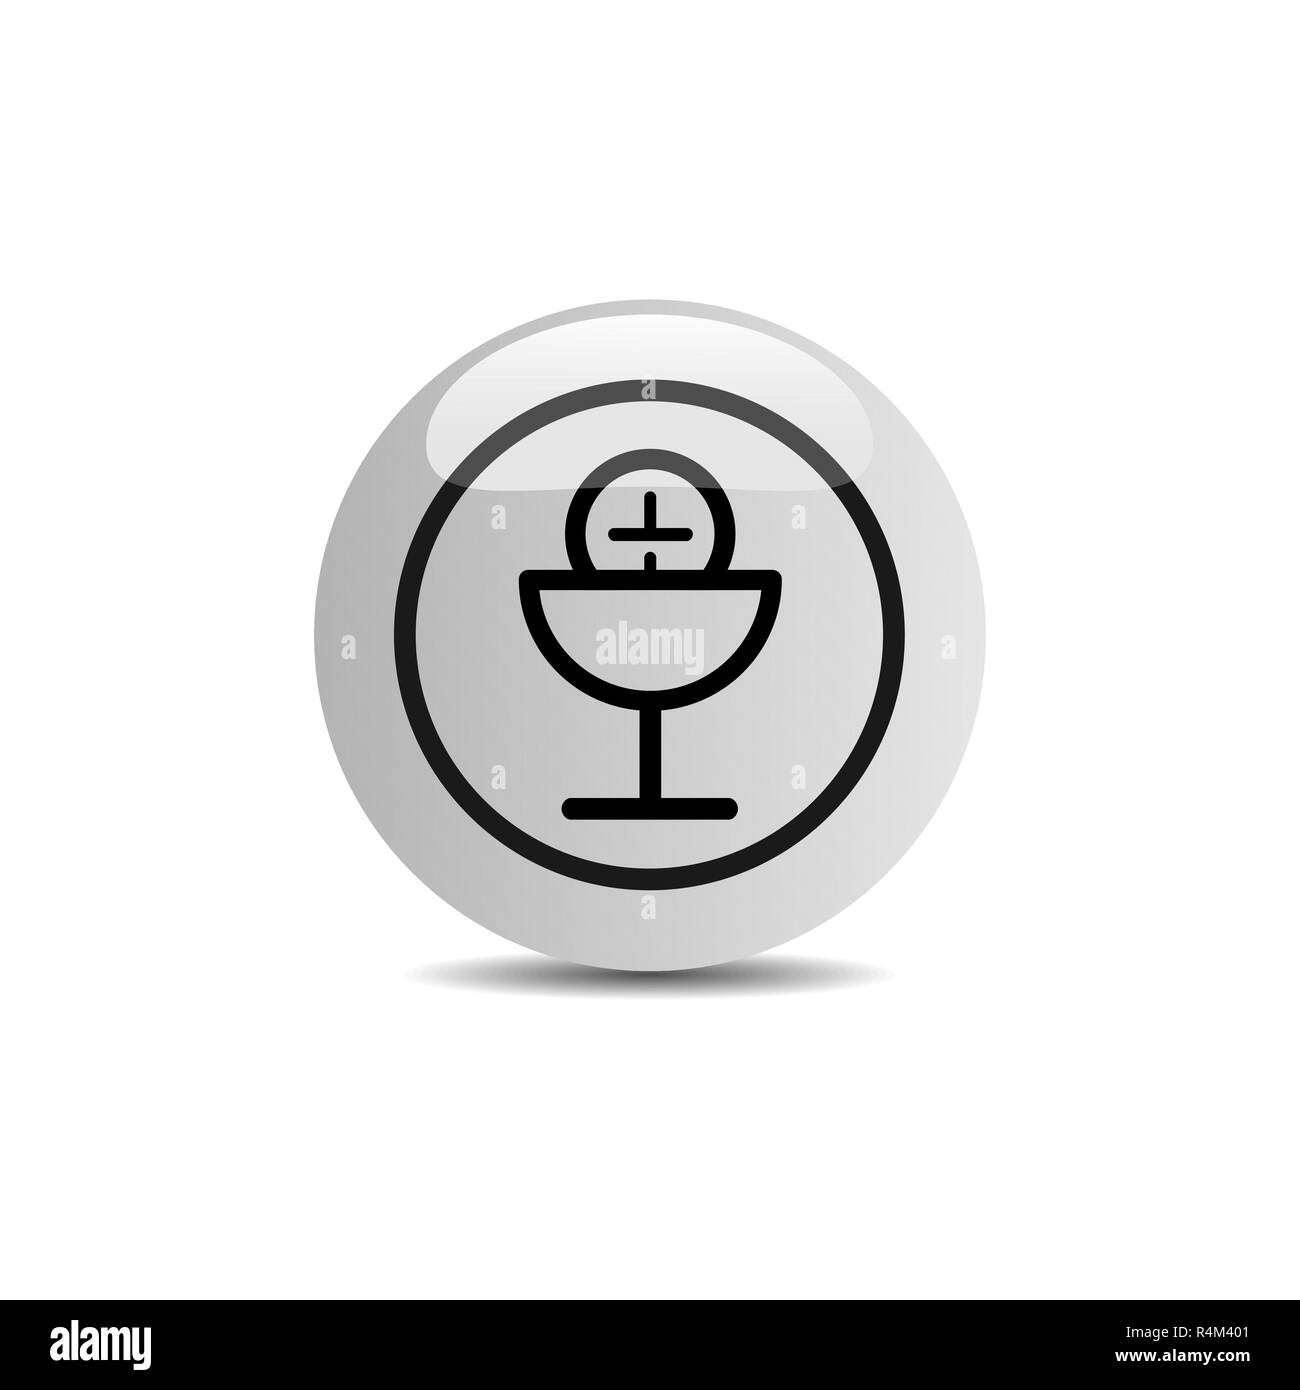 Communion icon in a button on a white background. Vector illustration Stock Vector